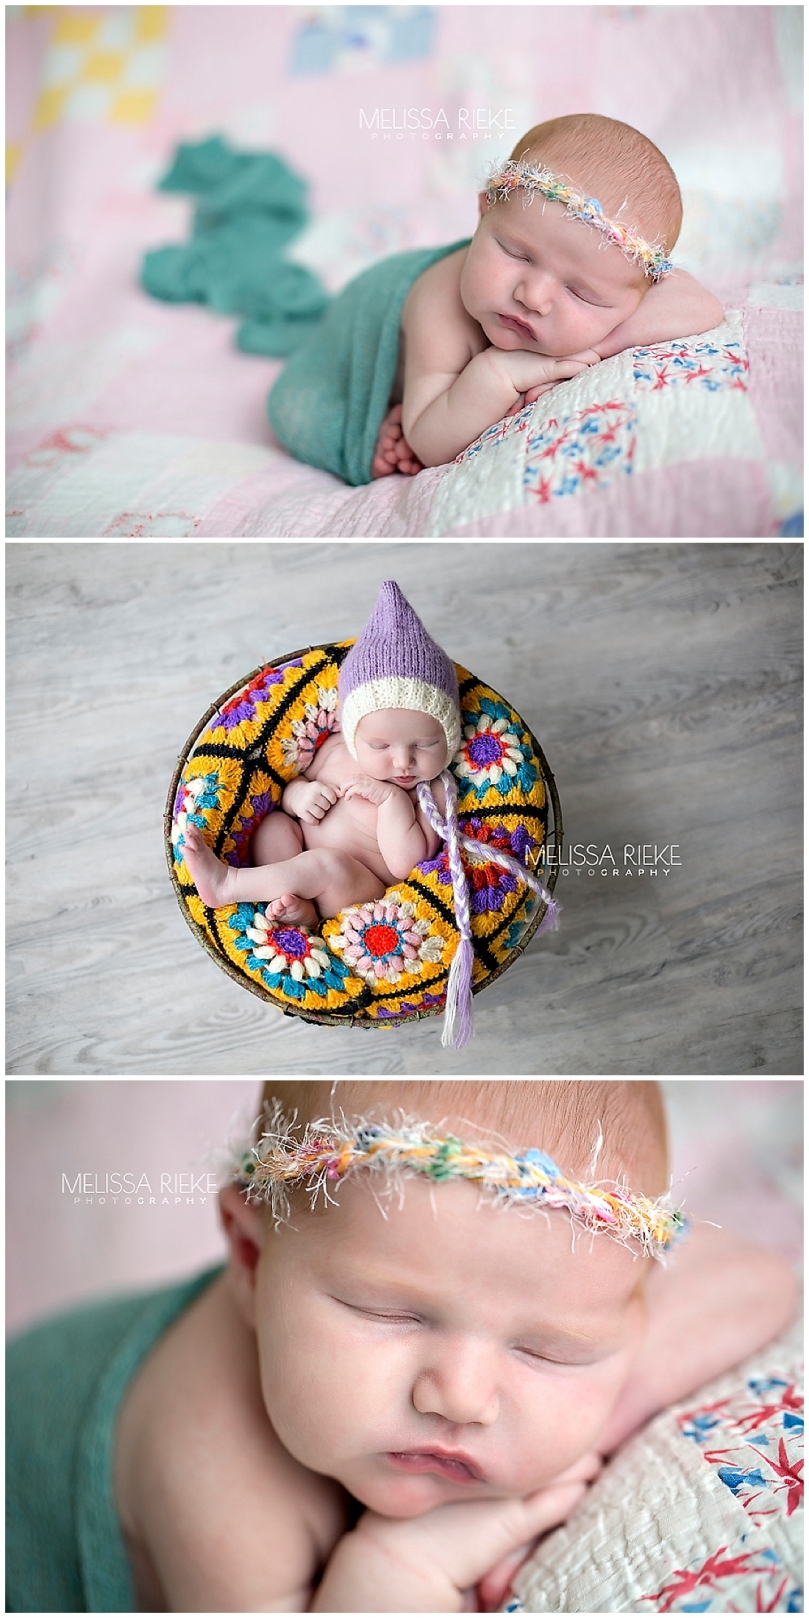 Granny Square Quilt Newborn Props by Melissa Rieke Photography